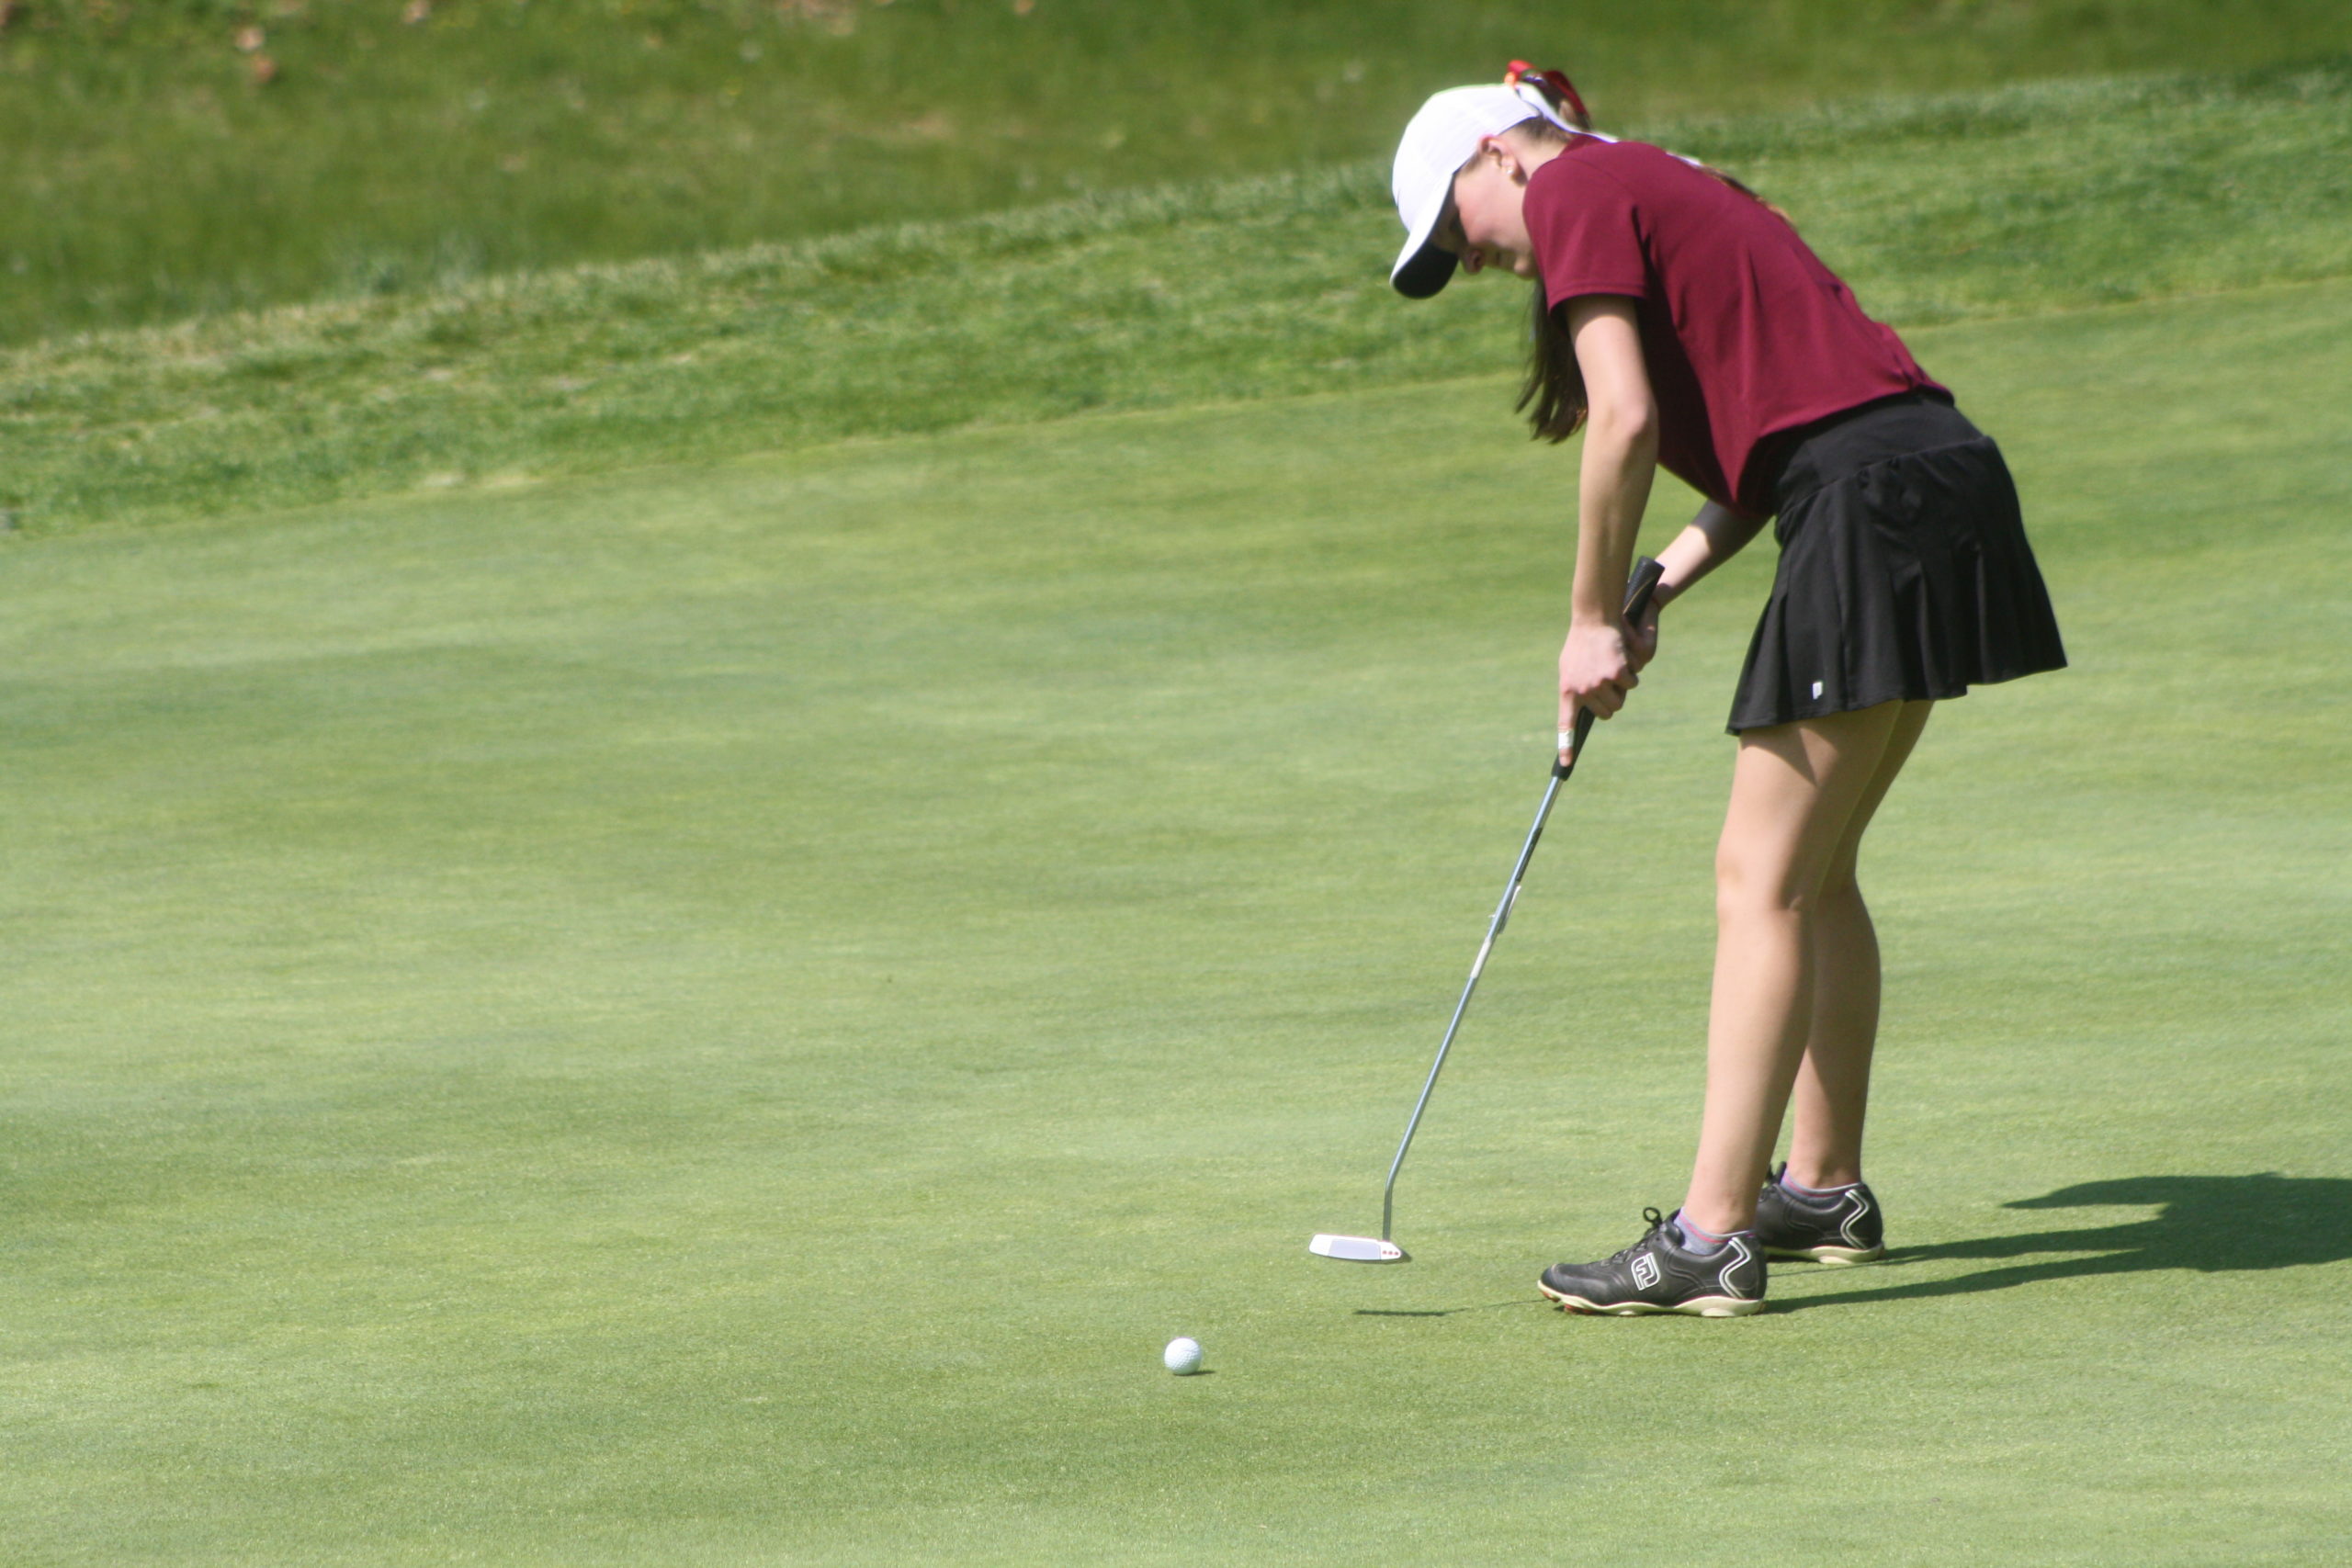 Caraline Oakley at last year's Suffolk County Girls Golf Championships.